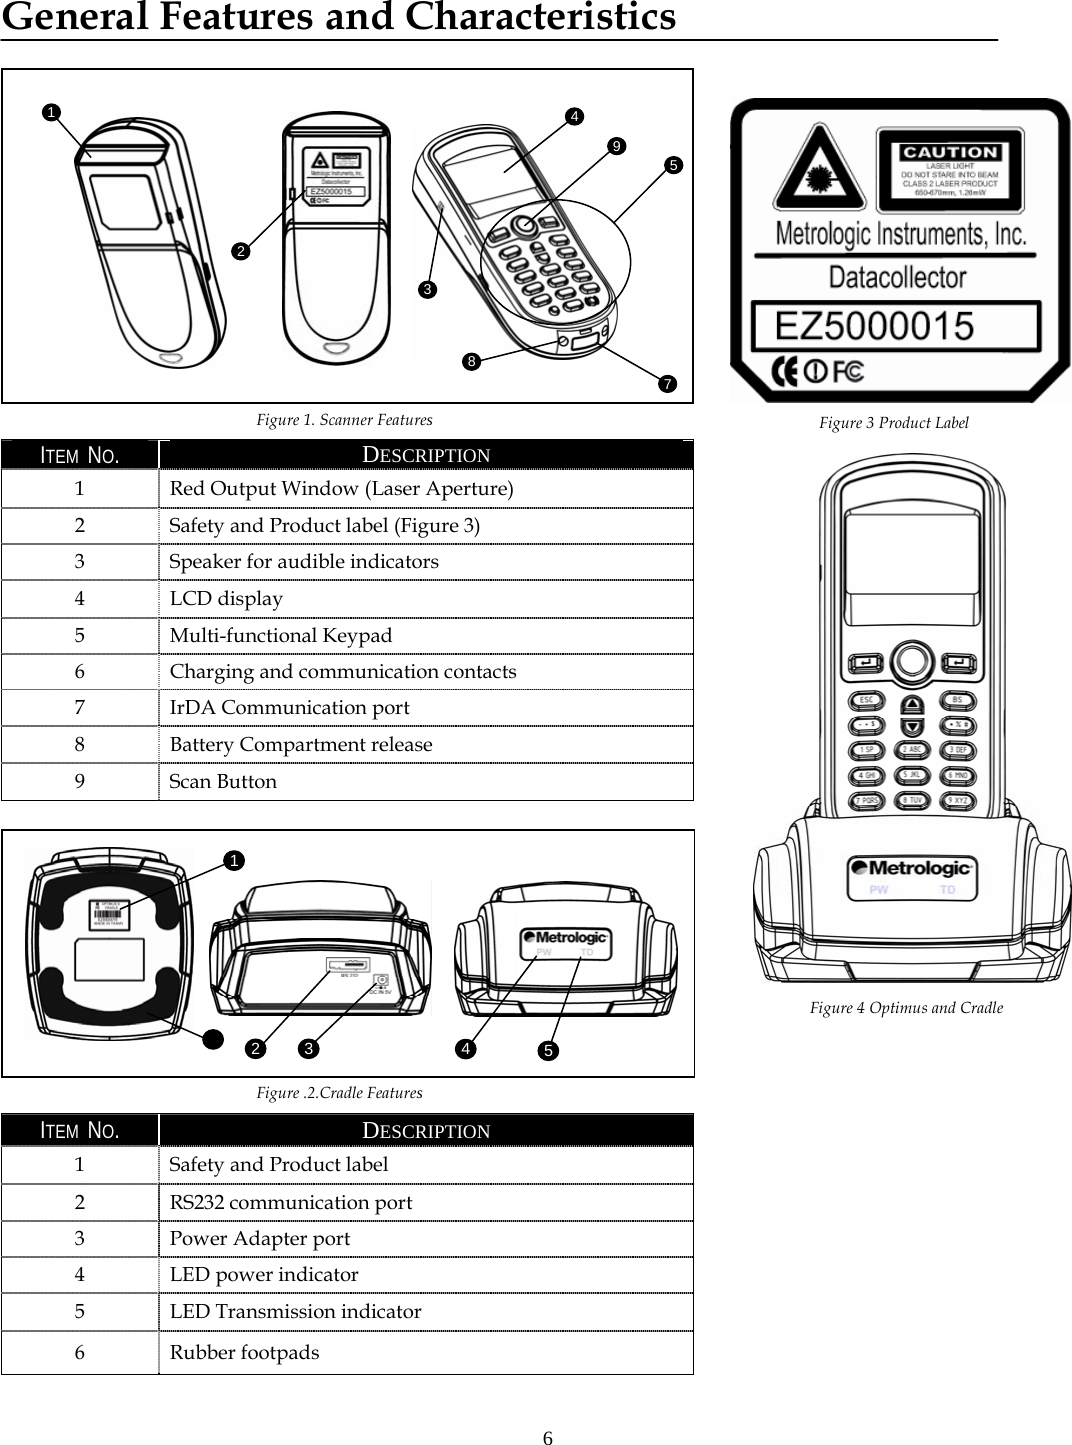  6General Features and Characteristics   Figure 1. Scanner Features ITEM  NO.  DESCRIPTION 1  Red Output Window (Laser Aperture) 2  Safety and Product label (Figure 3) 3  Speaker for audible indicators 4 LCD display 5 Multi-functional Keypad 6  Charging and communication contacts 7  IrDA Communication port 8 Battery Compartment release 9 Scan Button   Figure .2.Cradle Features ITEM  NO.  DESCRIPTION 1  Safety and Product label 2  RS232 communication port 3  Power Adapter port 4  LED power indicator 5  LED Transmission indicator 6 Rubber footpads  1 2  3  45F1 2 453 789Figure 3 Product Label Figure 4 Optimus and Cradle 